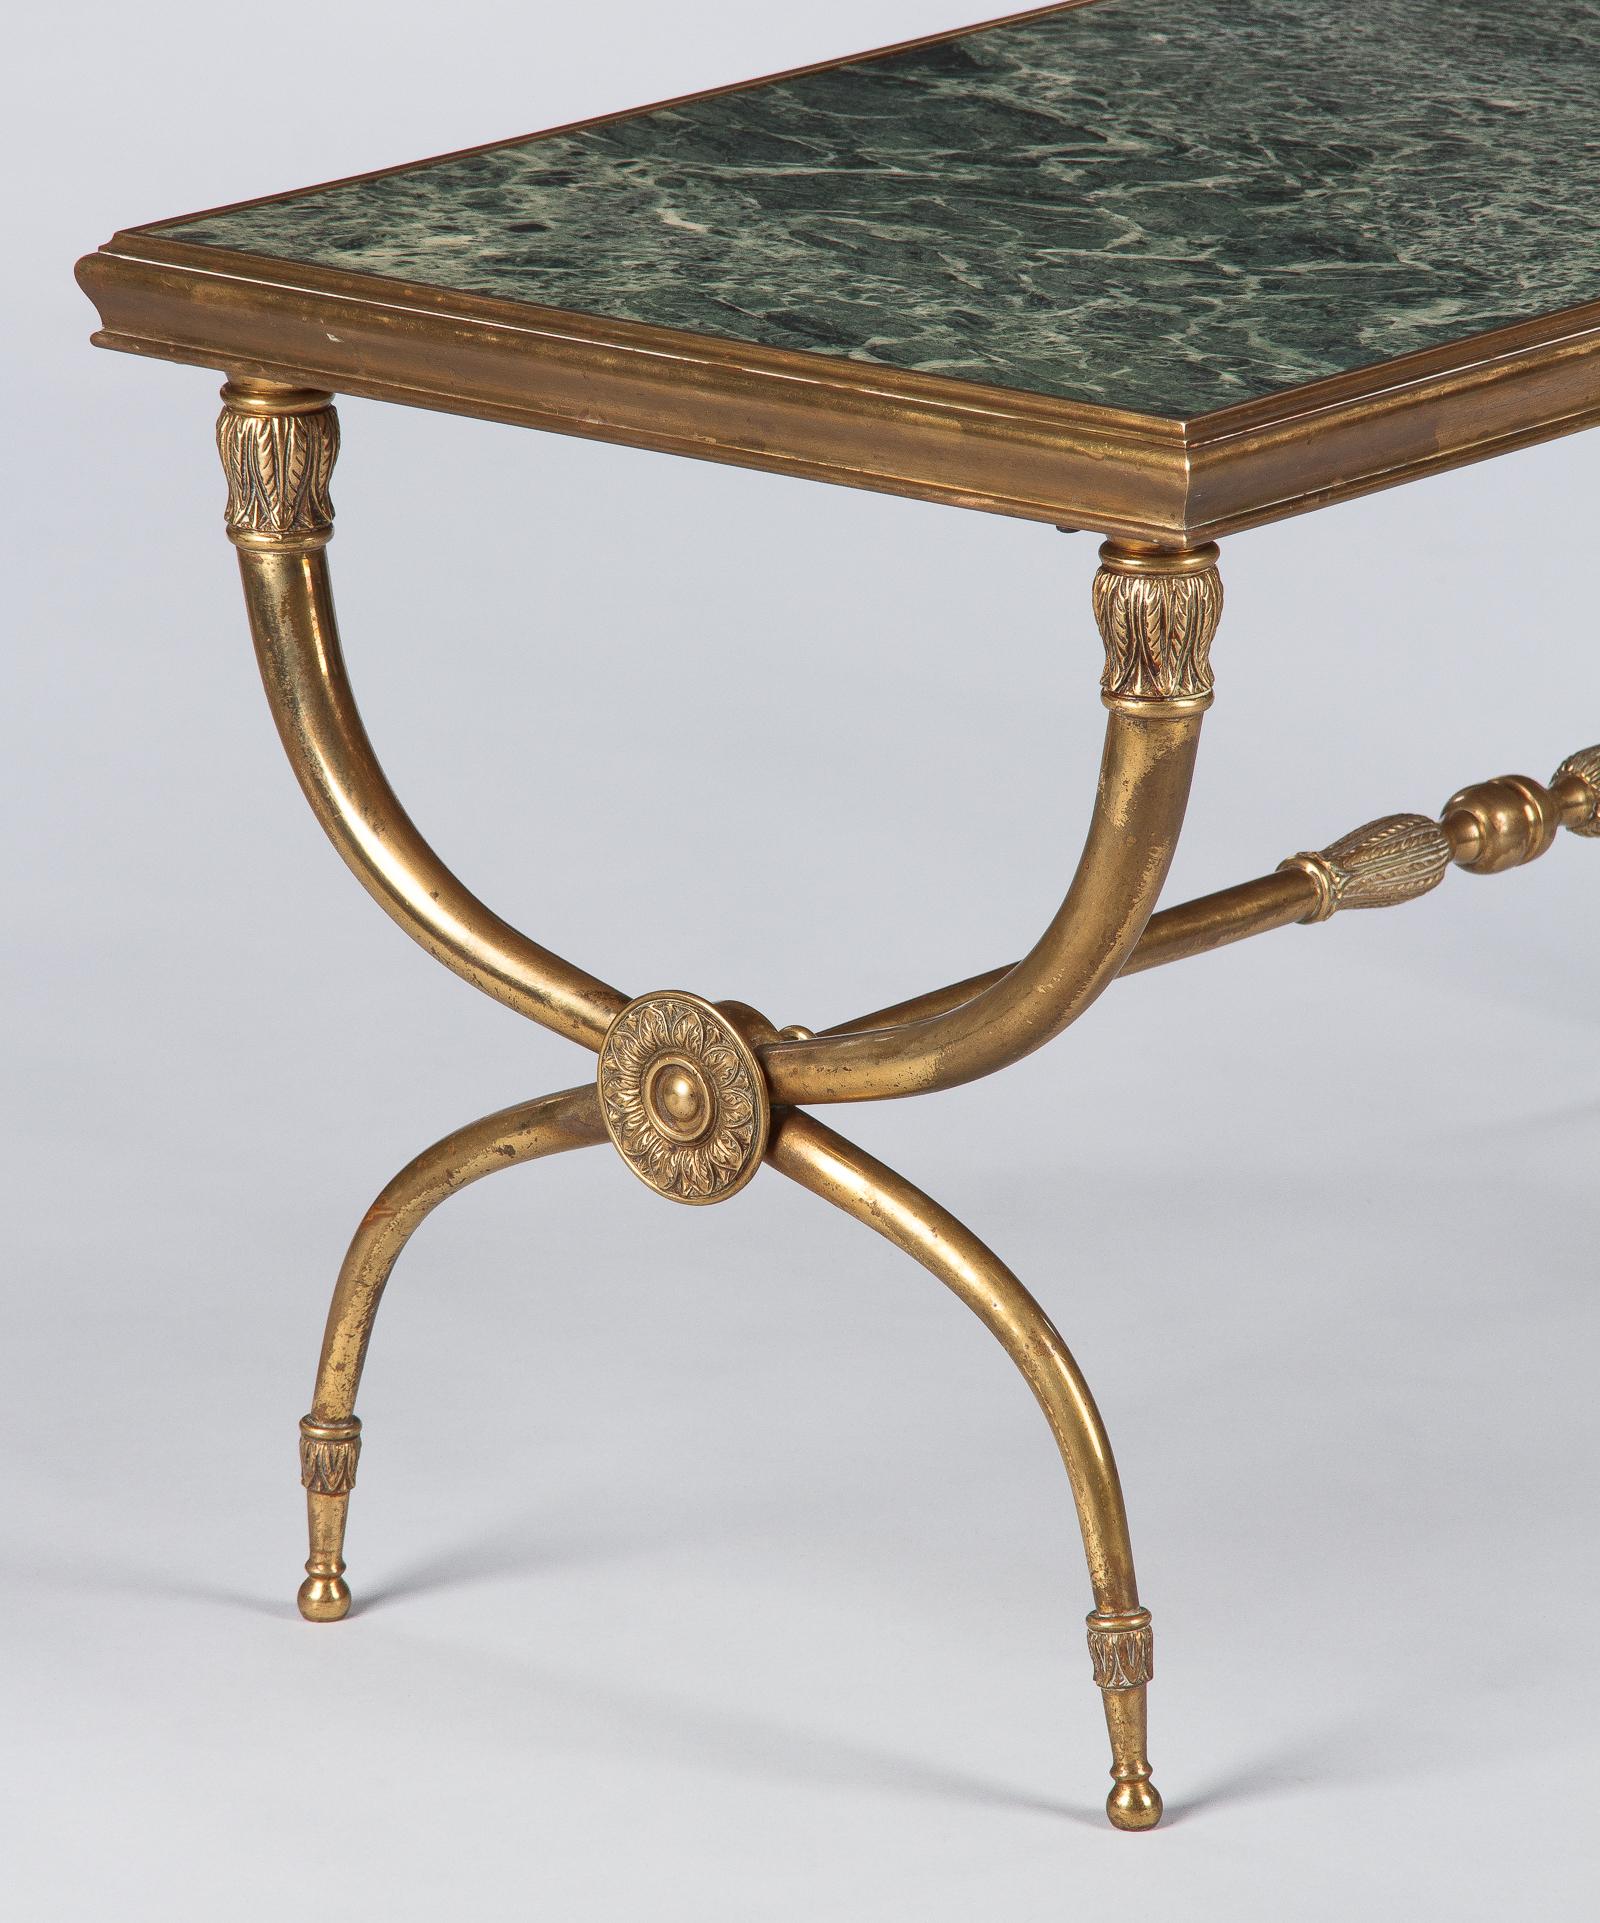 20th Century French Midcentury Brass and Marble Coffee Table Attributed to Raymond Subes